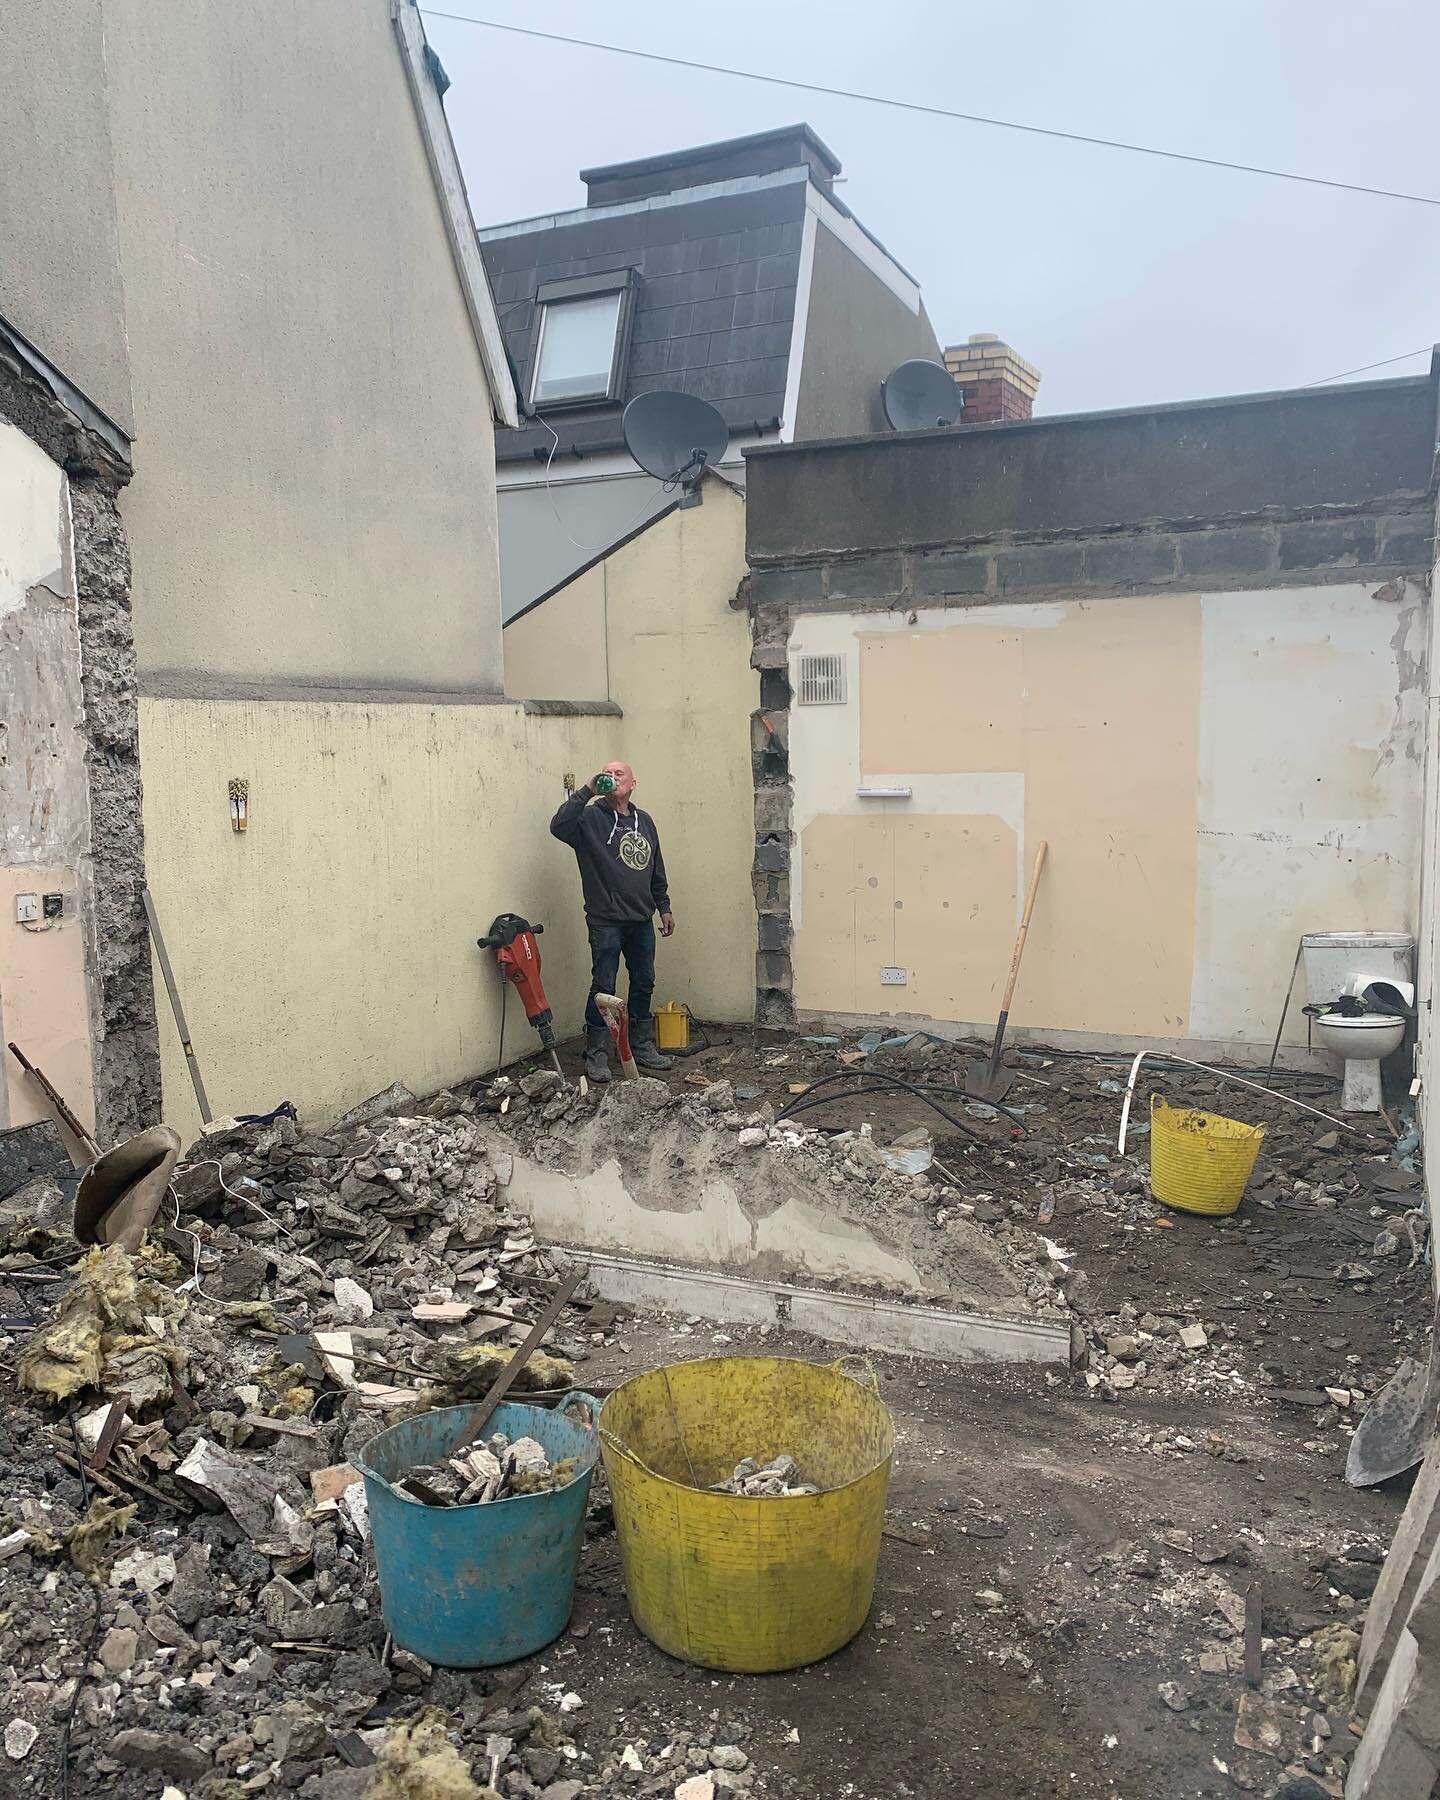 Complete home renovation on our project in Ringsend. 
This project involved the demolition of single story terraced bungalow. 
We underpinned the existing foundation to allow for new structure. The primary feature of the new cottage will be a mezzain